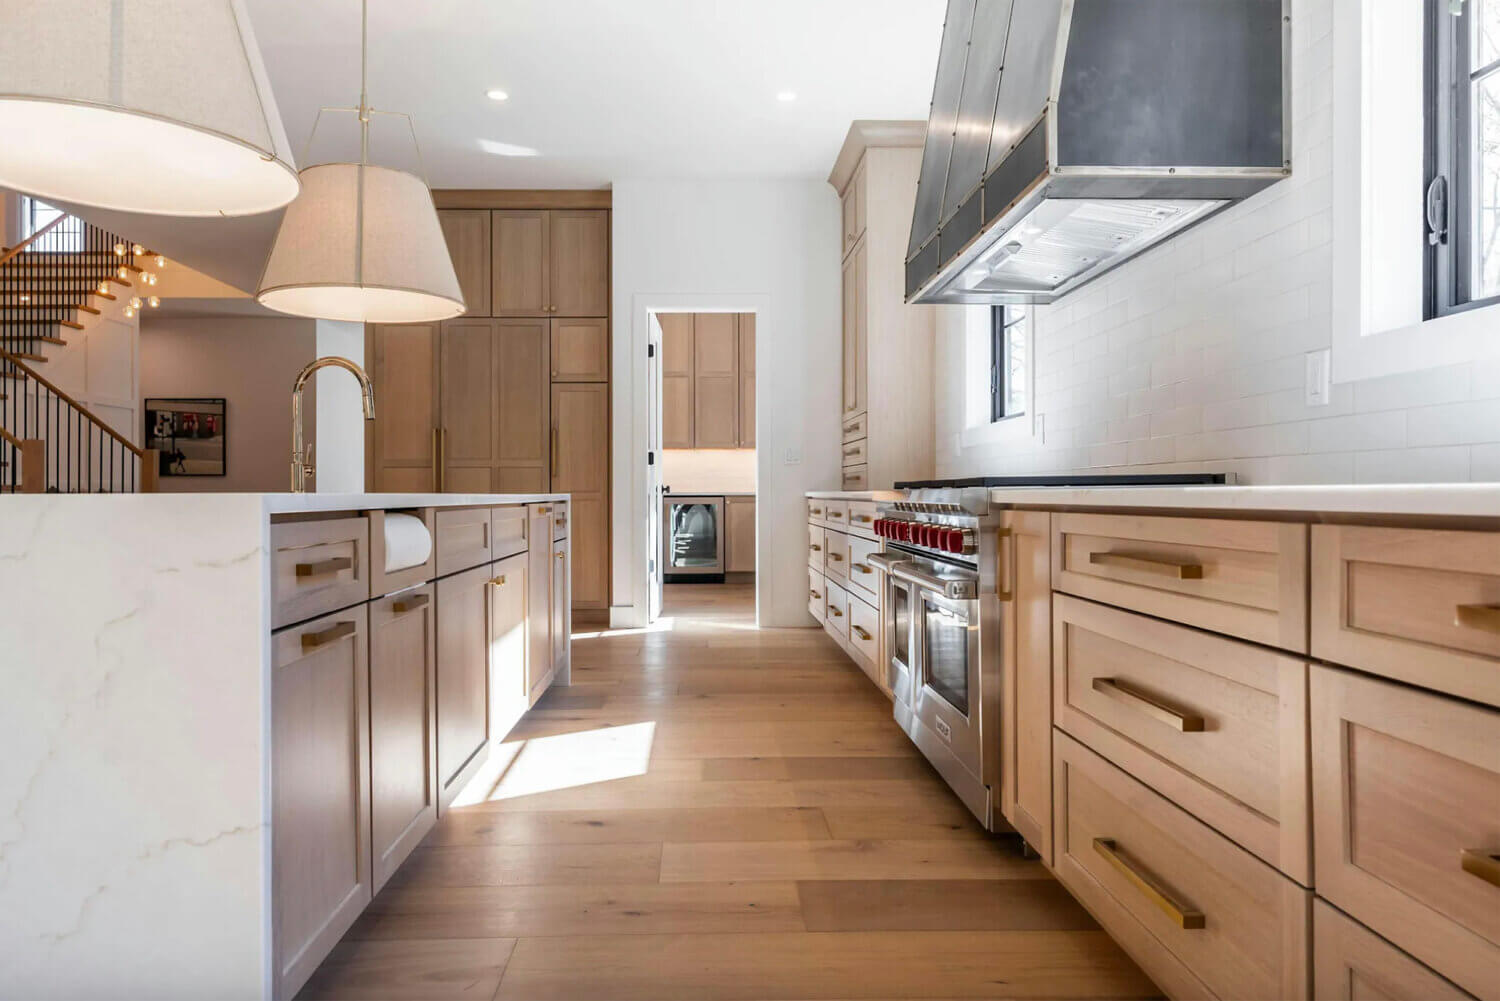 A trendy kitchen with light wood cabinets and wood flooring with an open concept layout and a large kitchen island with waterfall countertop and shaker cabinet doors.